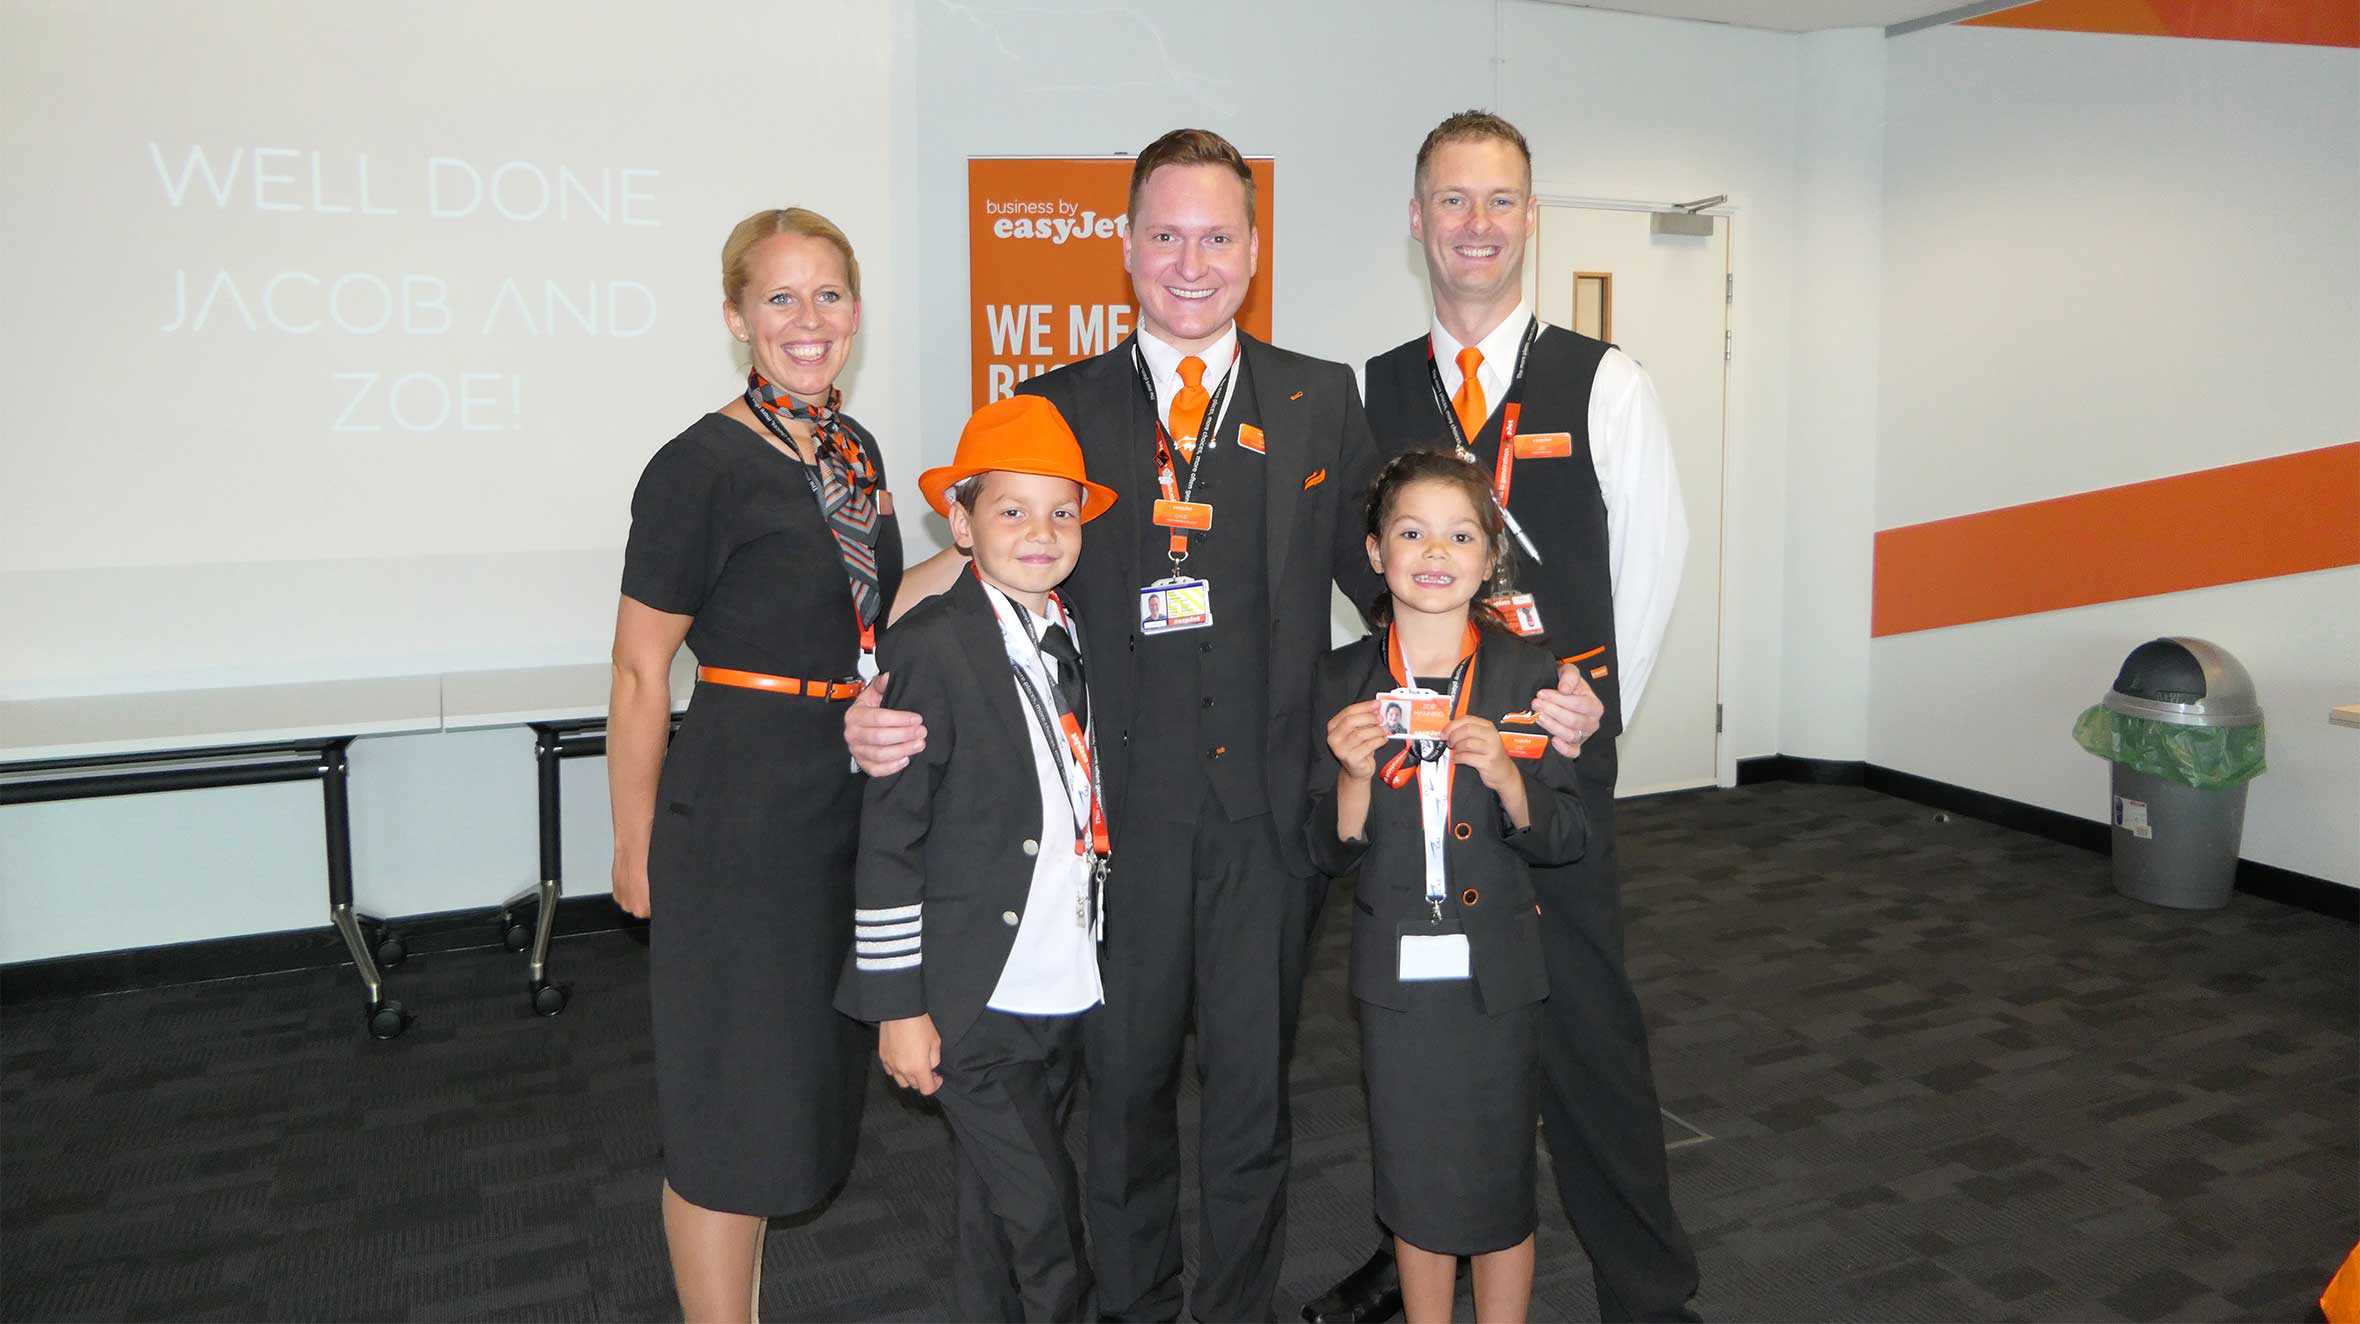 Jacob and his sister, Zoe with members of the flight crew